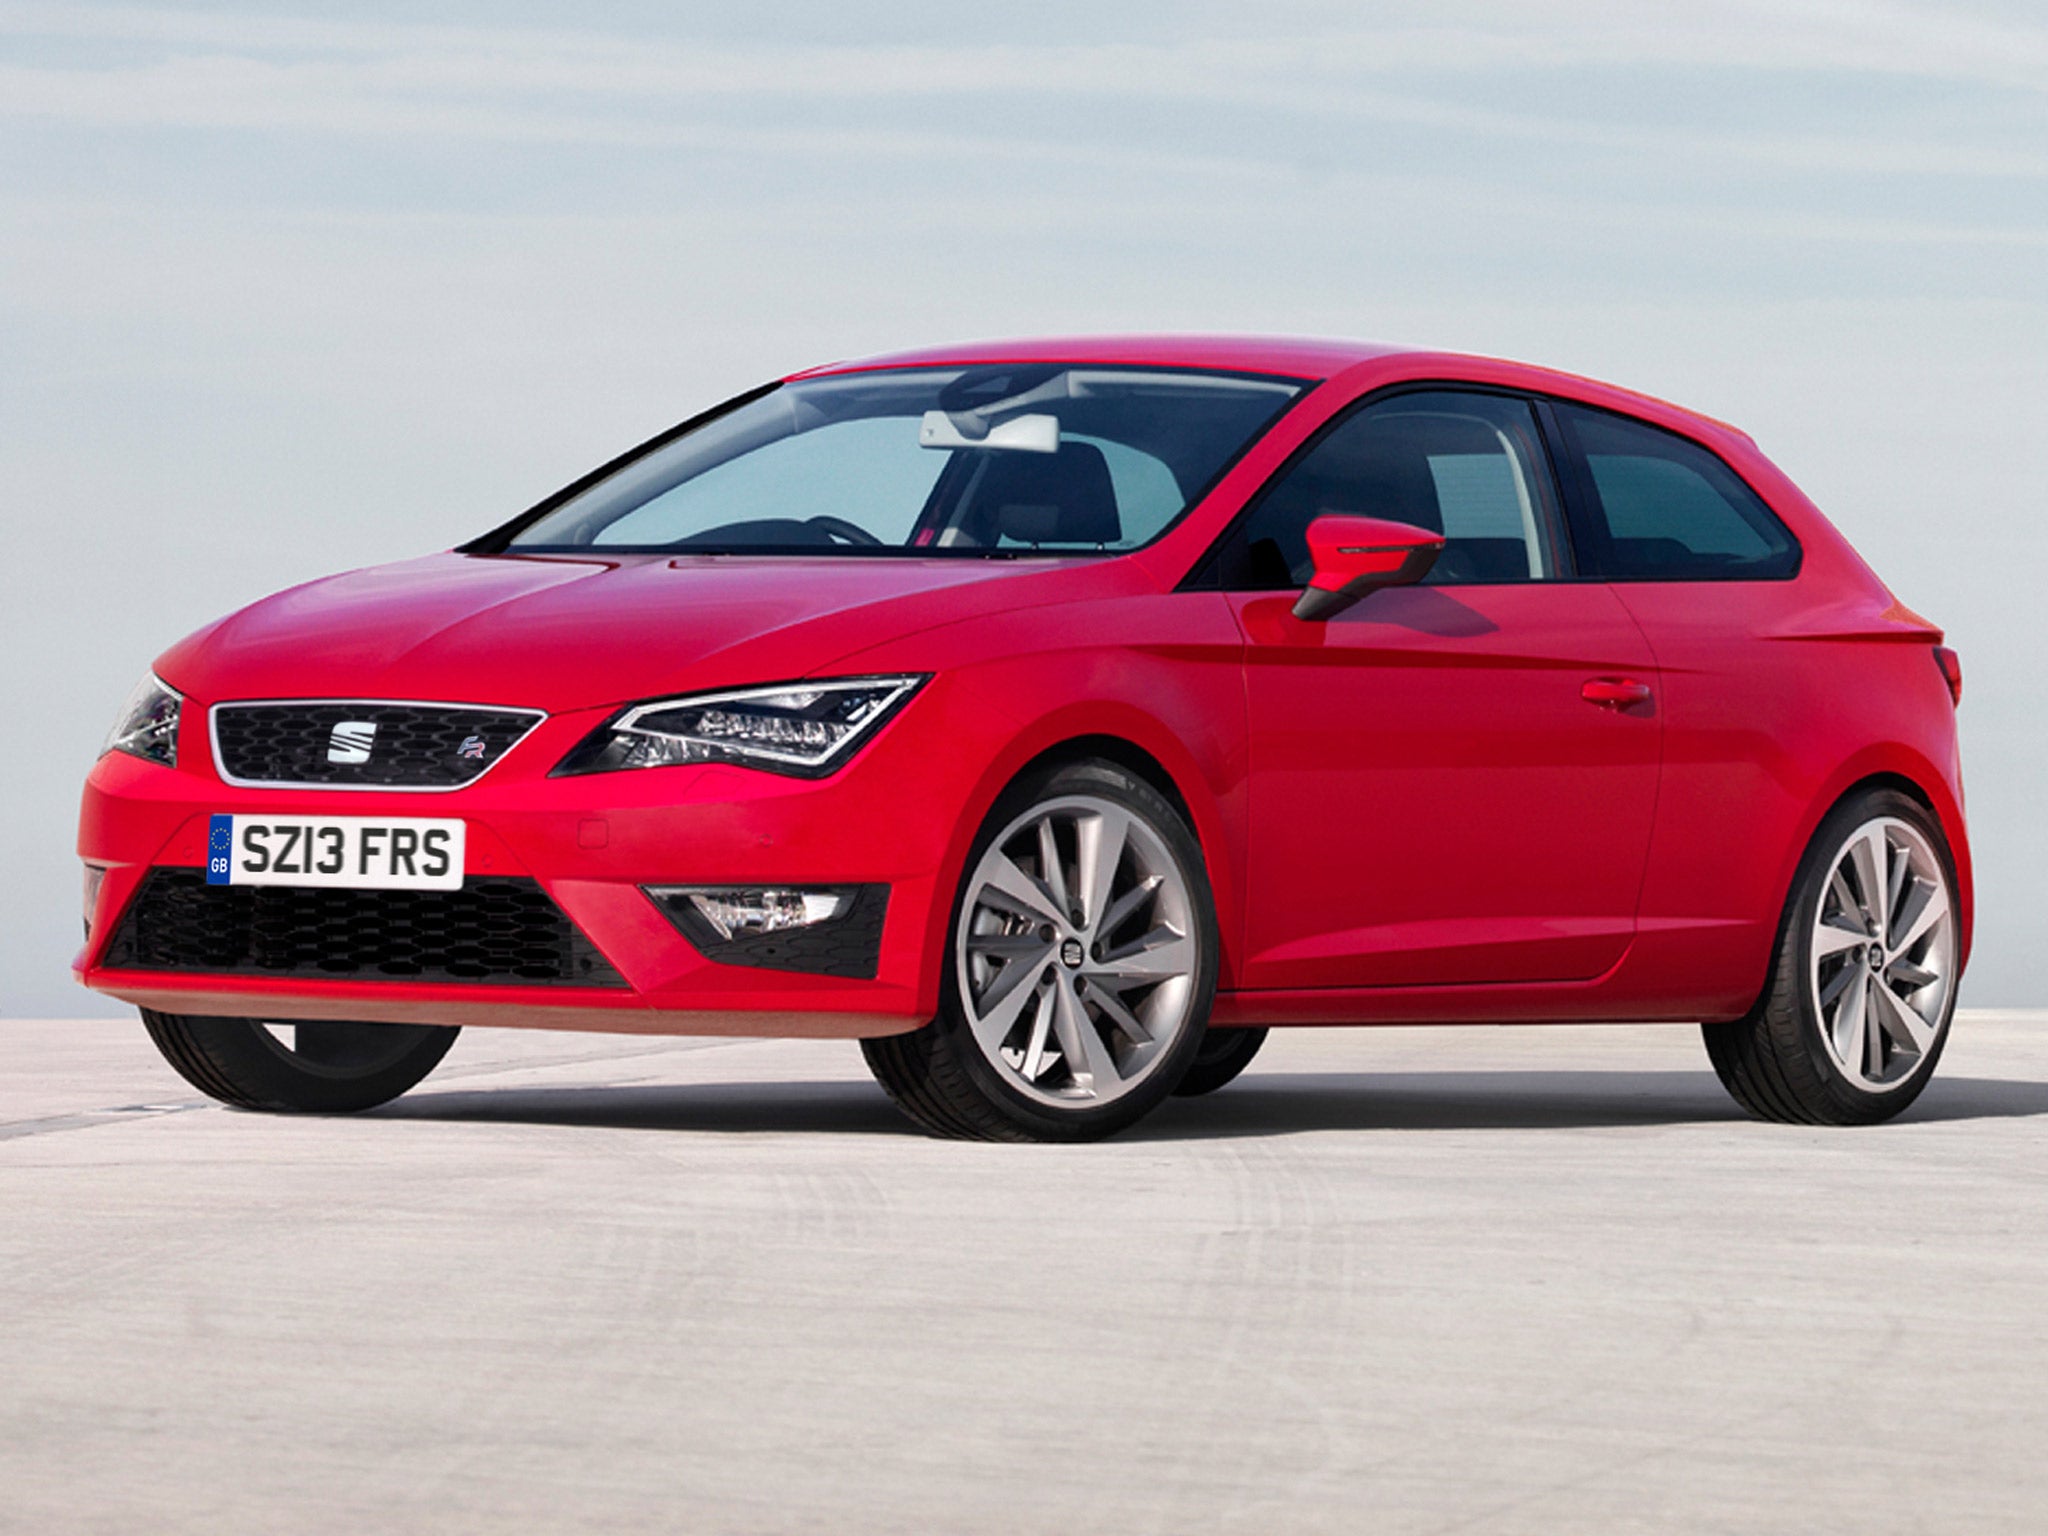 Lively performance: the new Seat Leon SC